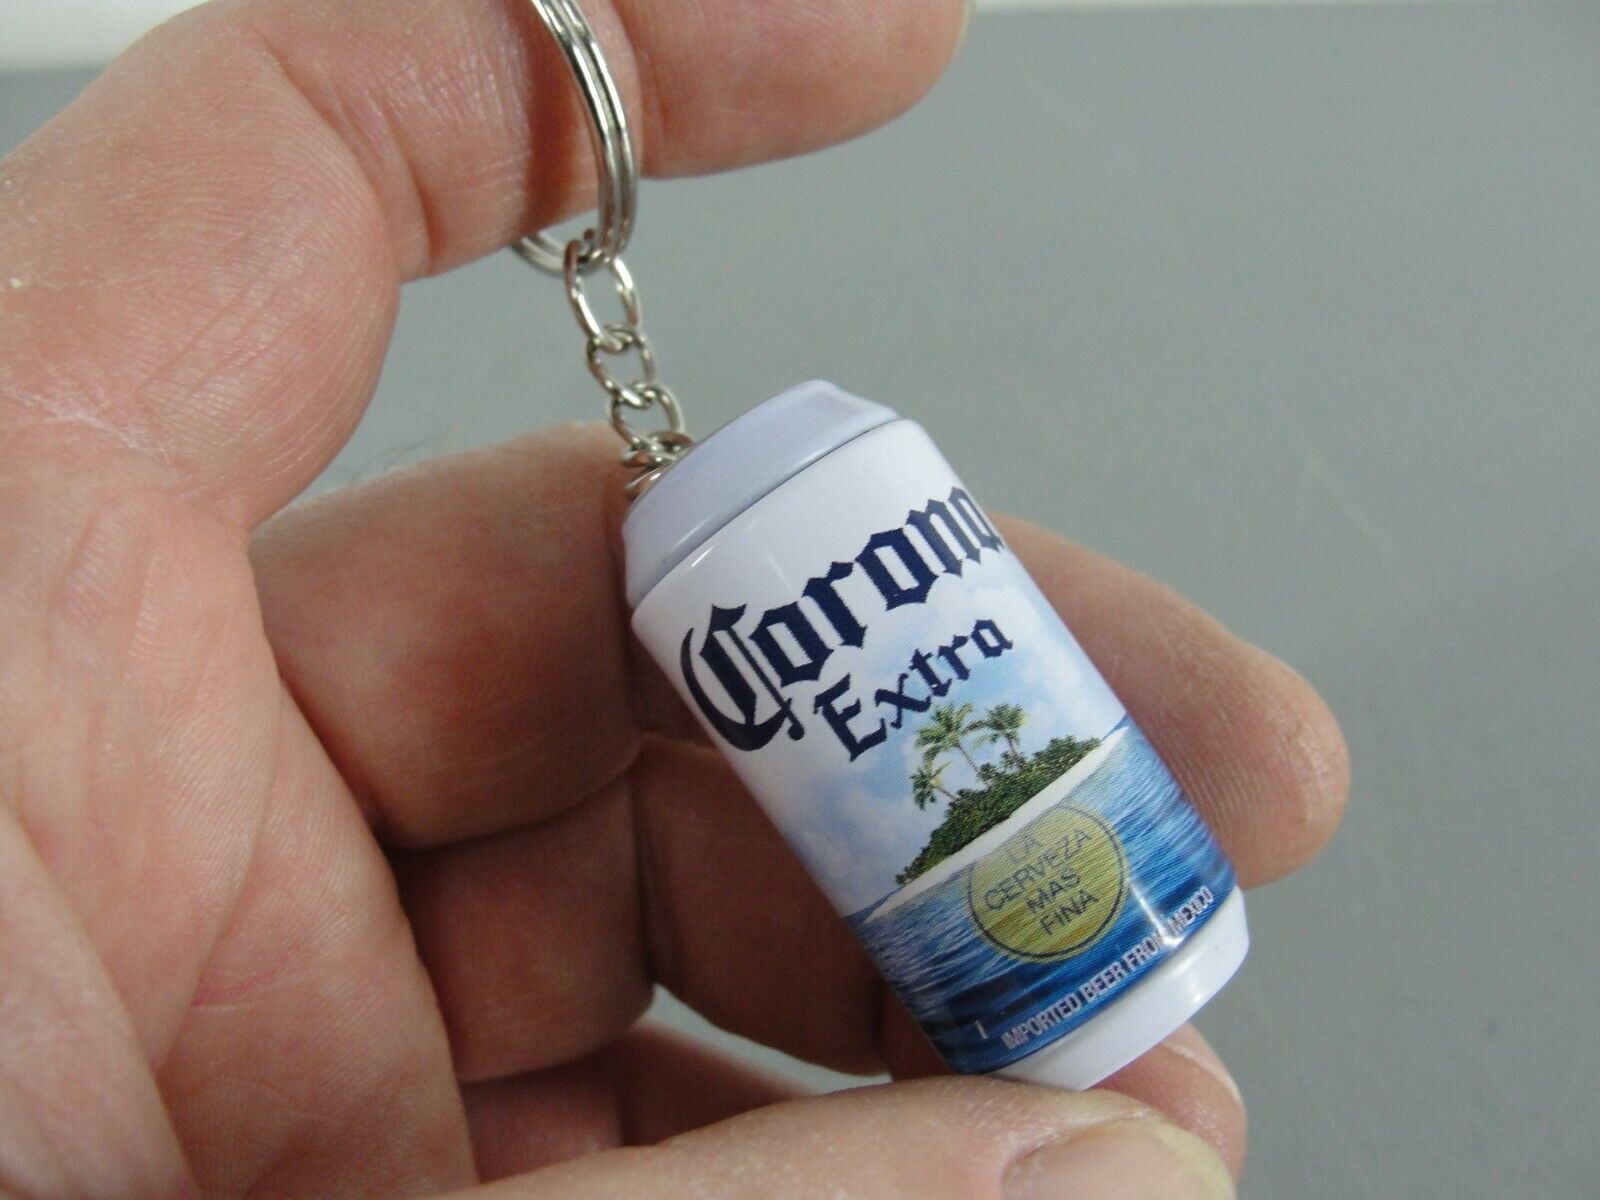 CORONA EXTRA 👑 MINI BEER CAN BEACH IN A STEEL CAN KEYRING KEY CHAIN CHARM NEW